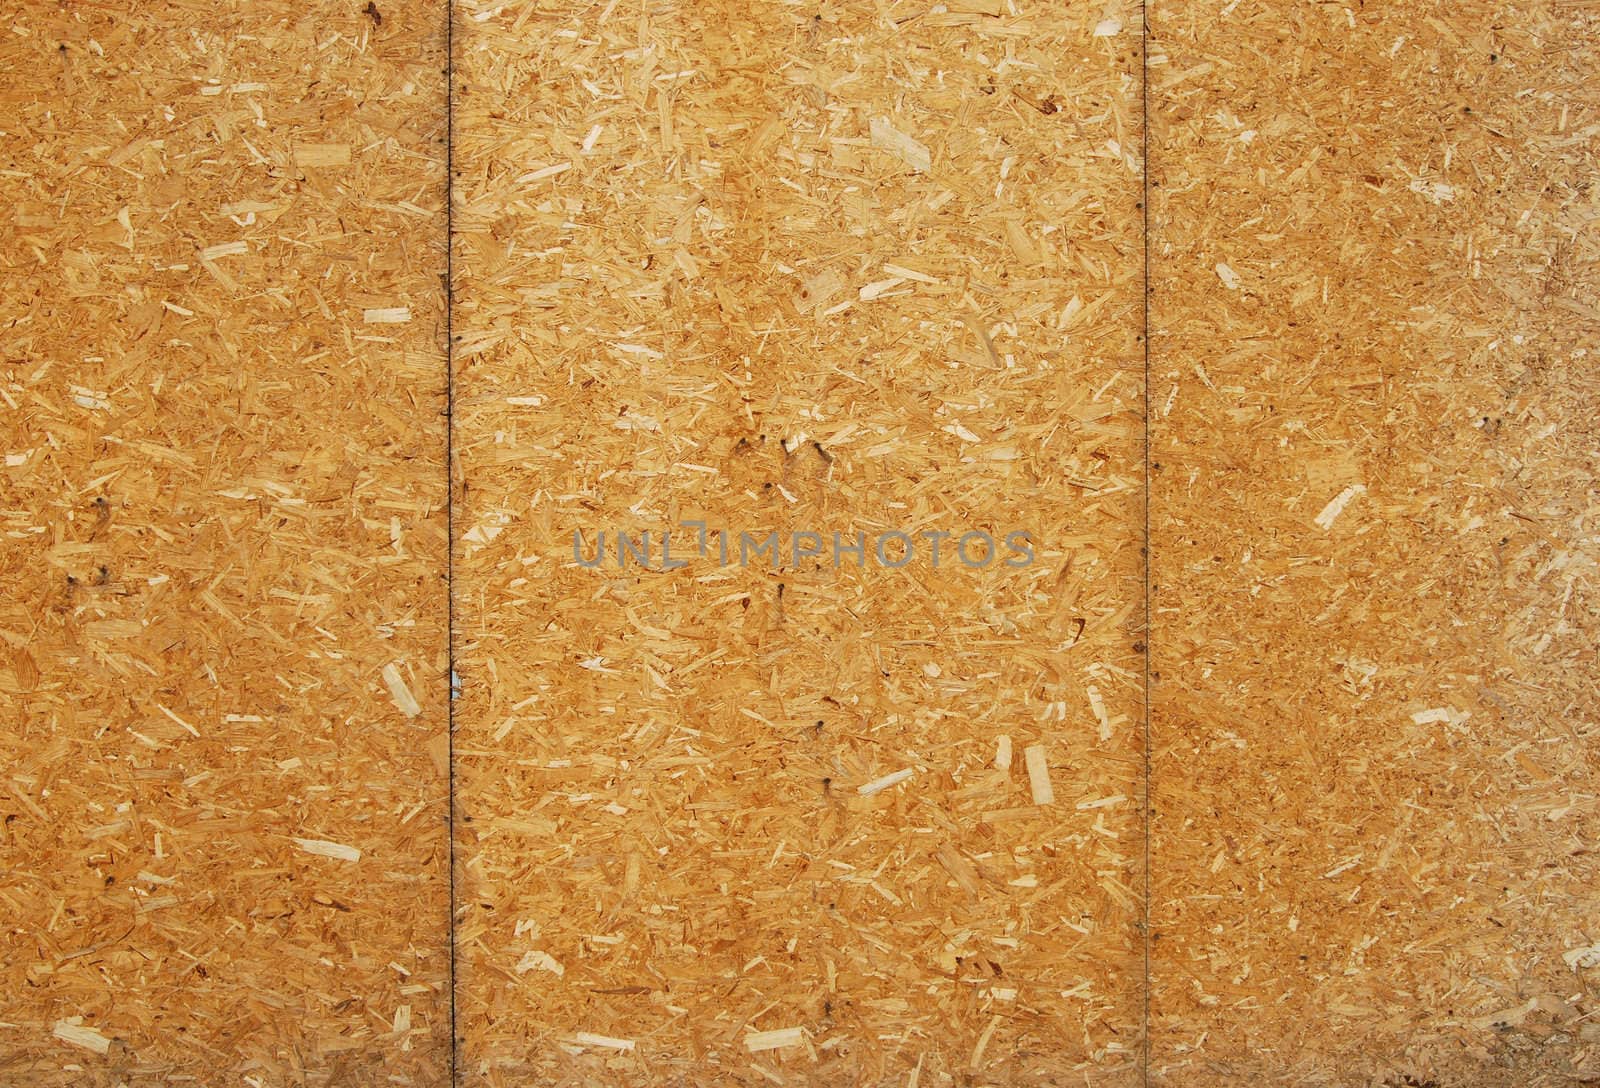 Used oriented strand board panels as background